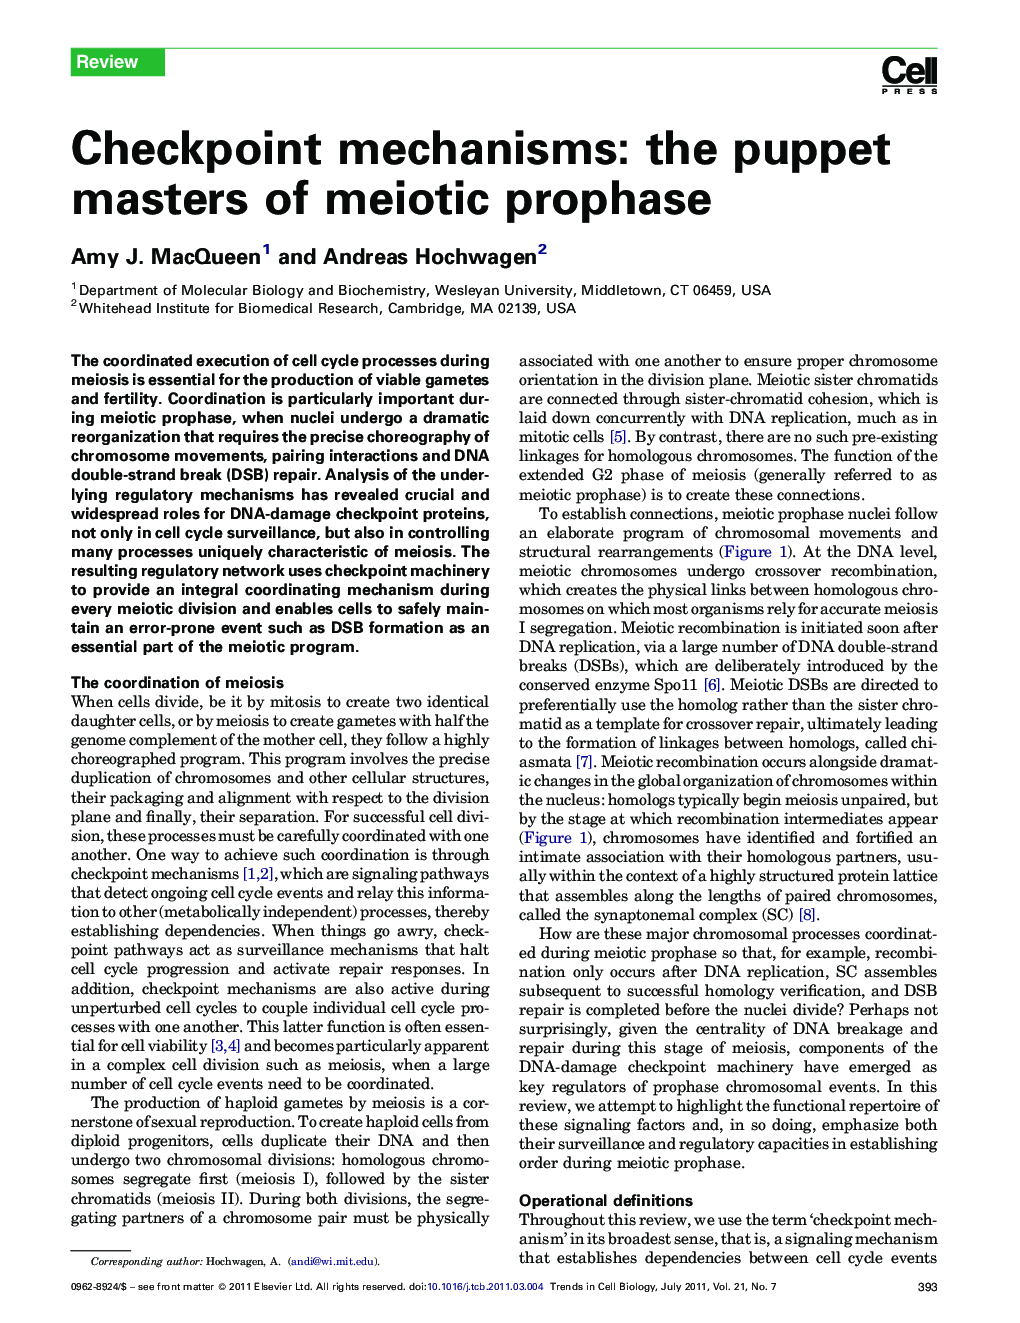 Checkpoint mechanisms: the puppet masters of meiotic prophase